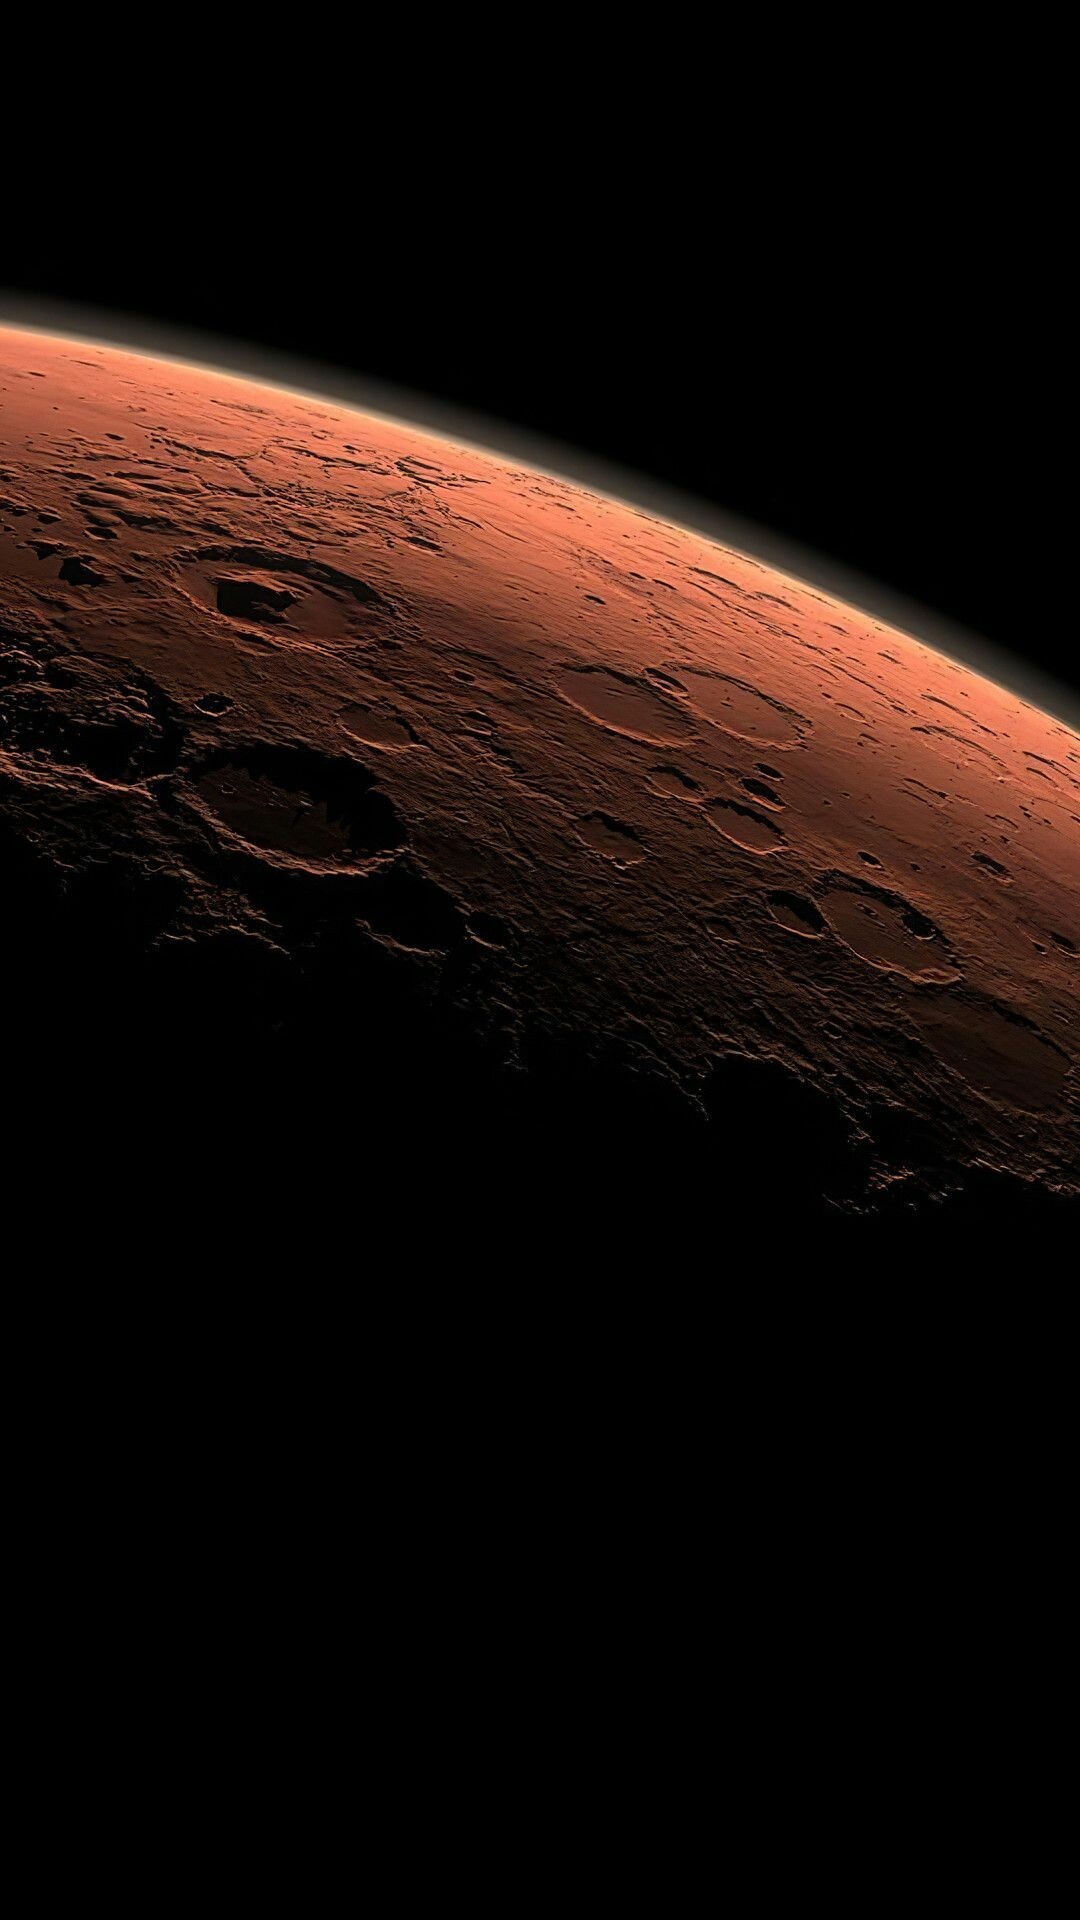 Mars: The planet has a crust primarily composed of elements similar to Earth's crust. 1080x1920 Full HD Background.